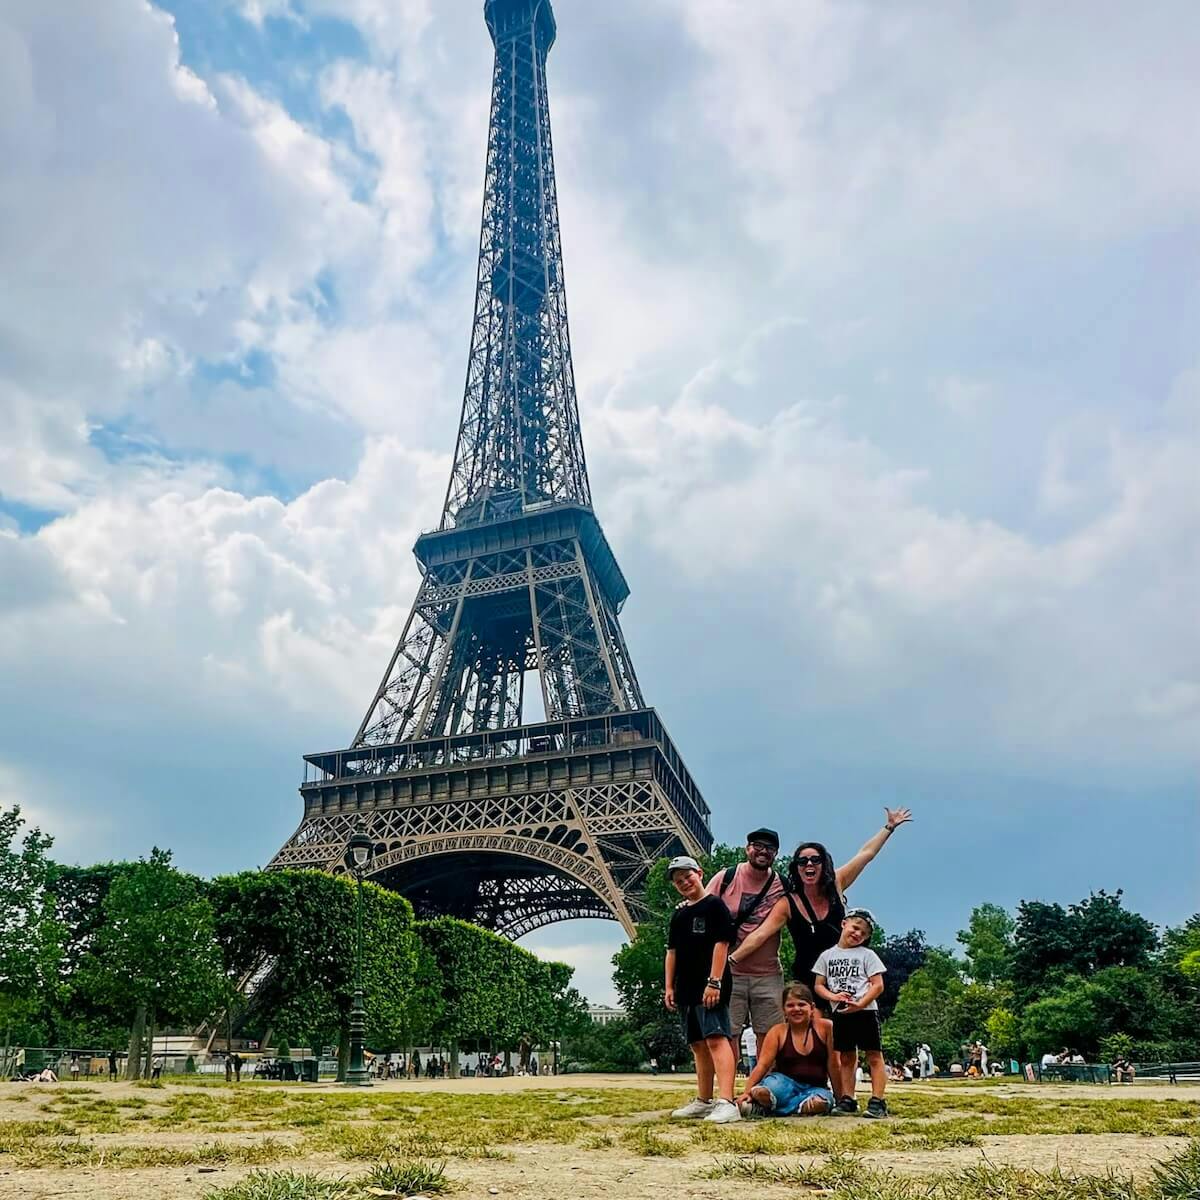 Our family in Paris